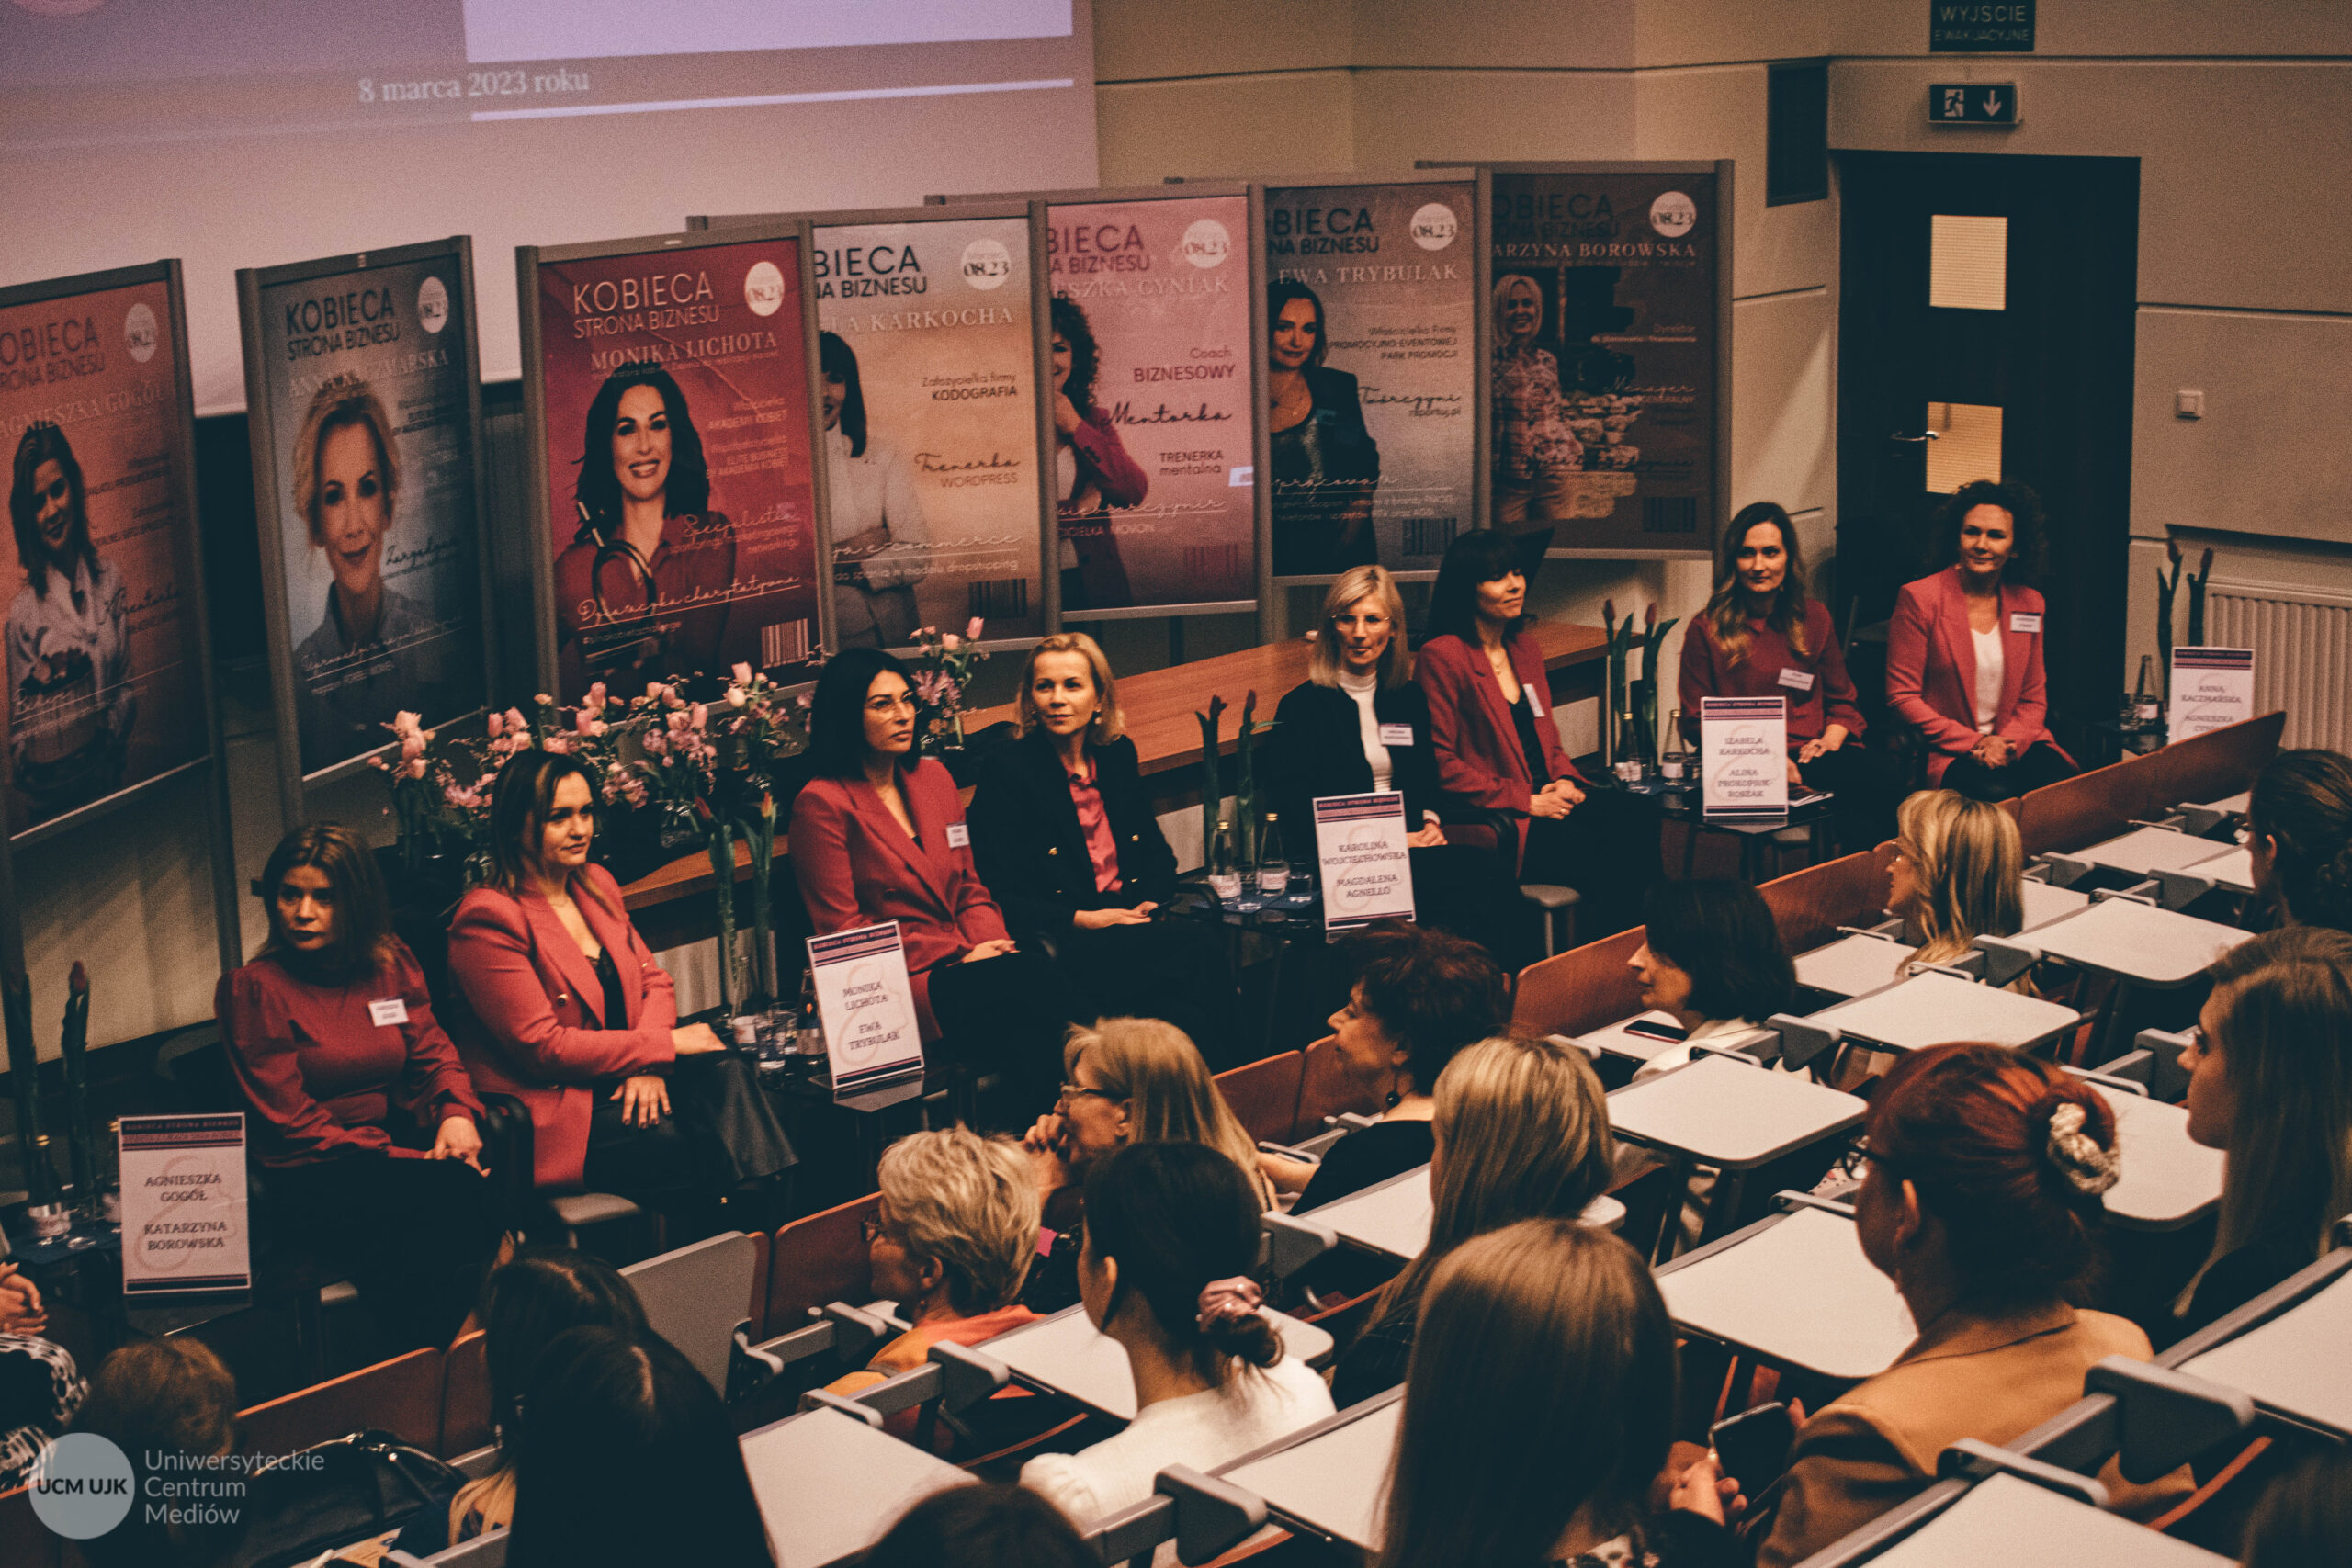 March 8th: UJK’s Debate on Women in Business and Science